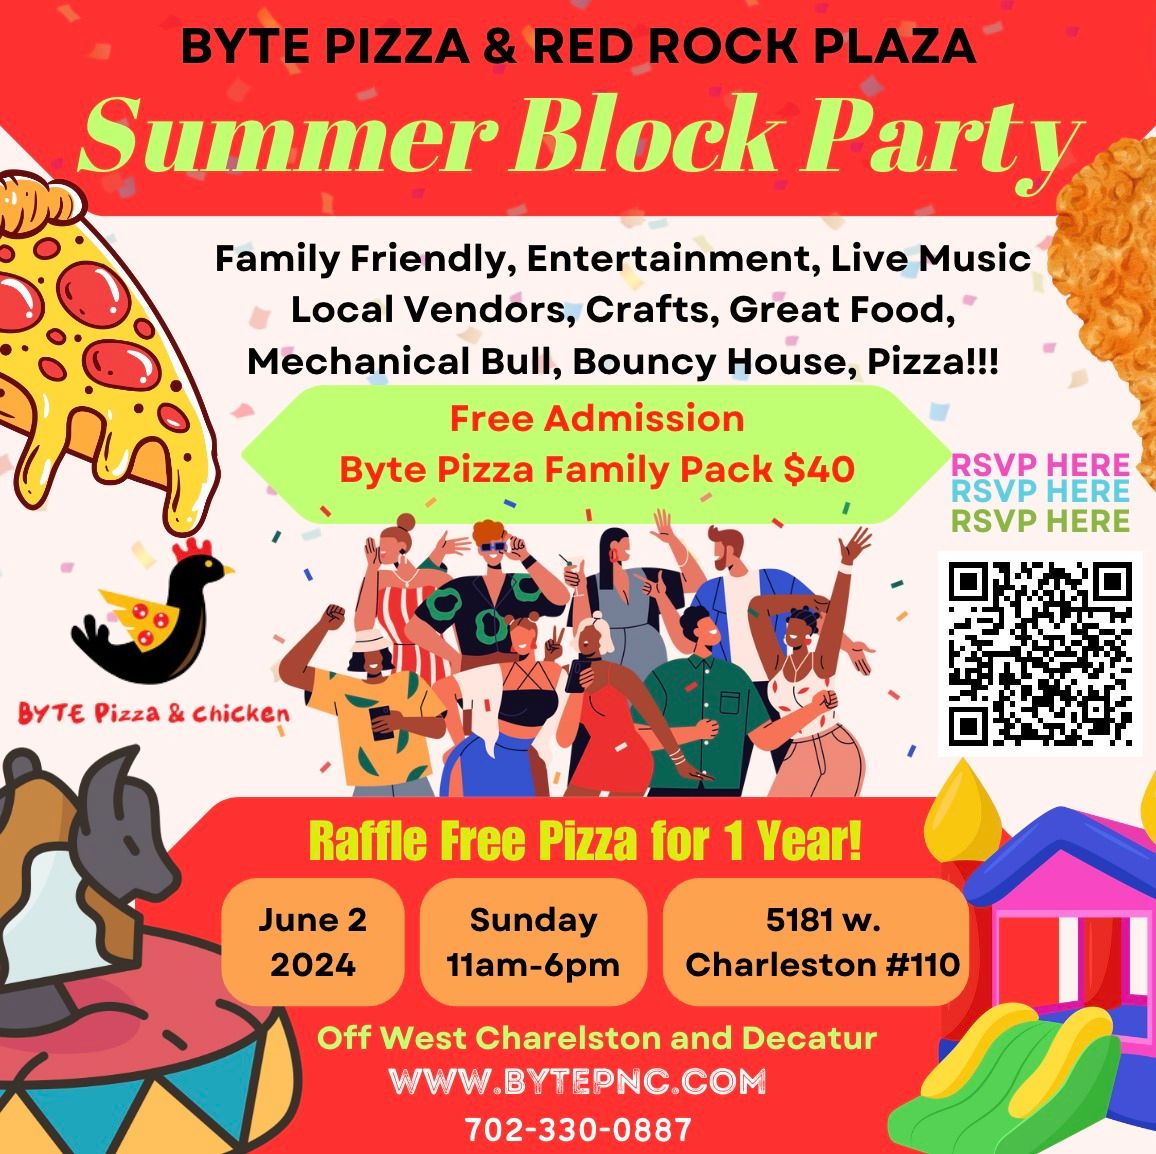 Family Friendly Summer Block Party Presented by Byte Pizza and Chicken at Red Rock Plaza.